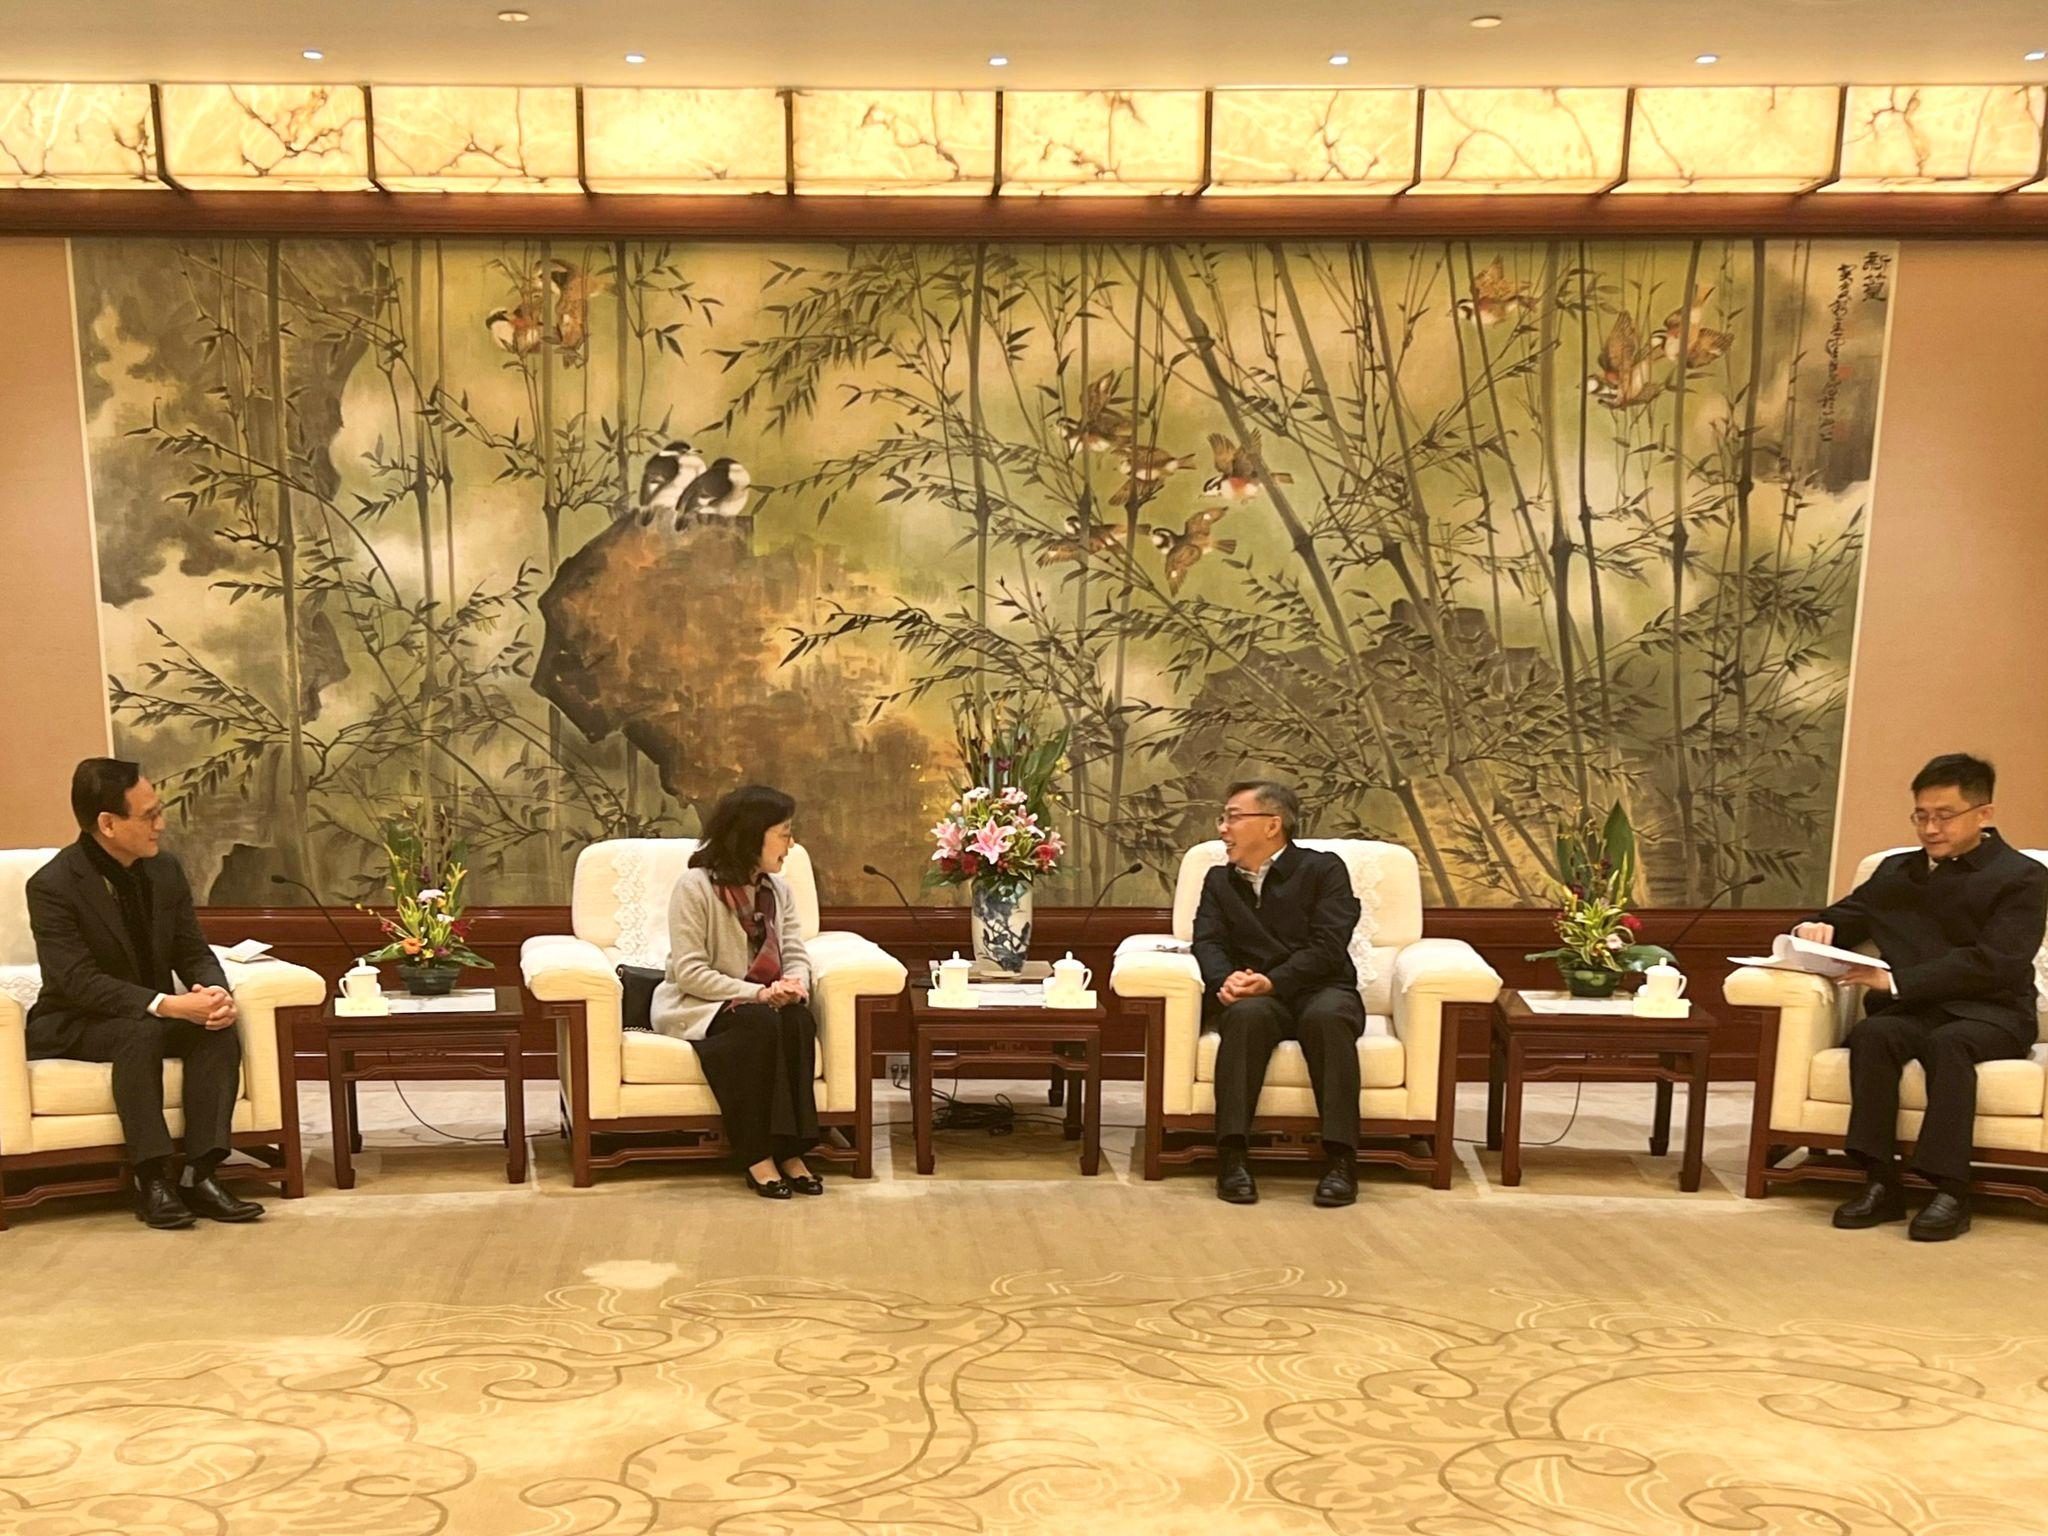 Led by the Secretary for Development, Ms Bernadette Linn, the delegation of the Development Bureau concluded the visit to Shanghai today  (December 21). Photo shows Ms Linn (second left) and the Chairman of the Legislative Council Panel on Development, Mr Tony Tse (first left), meeting with Vice Mayor of the Shanghai Municipal People's Government (SMPG) Mr Zhang Xiaohong (second right); and Deputy Secretary-General of the SMPG Mr Wang Weiren (first right).